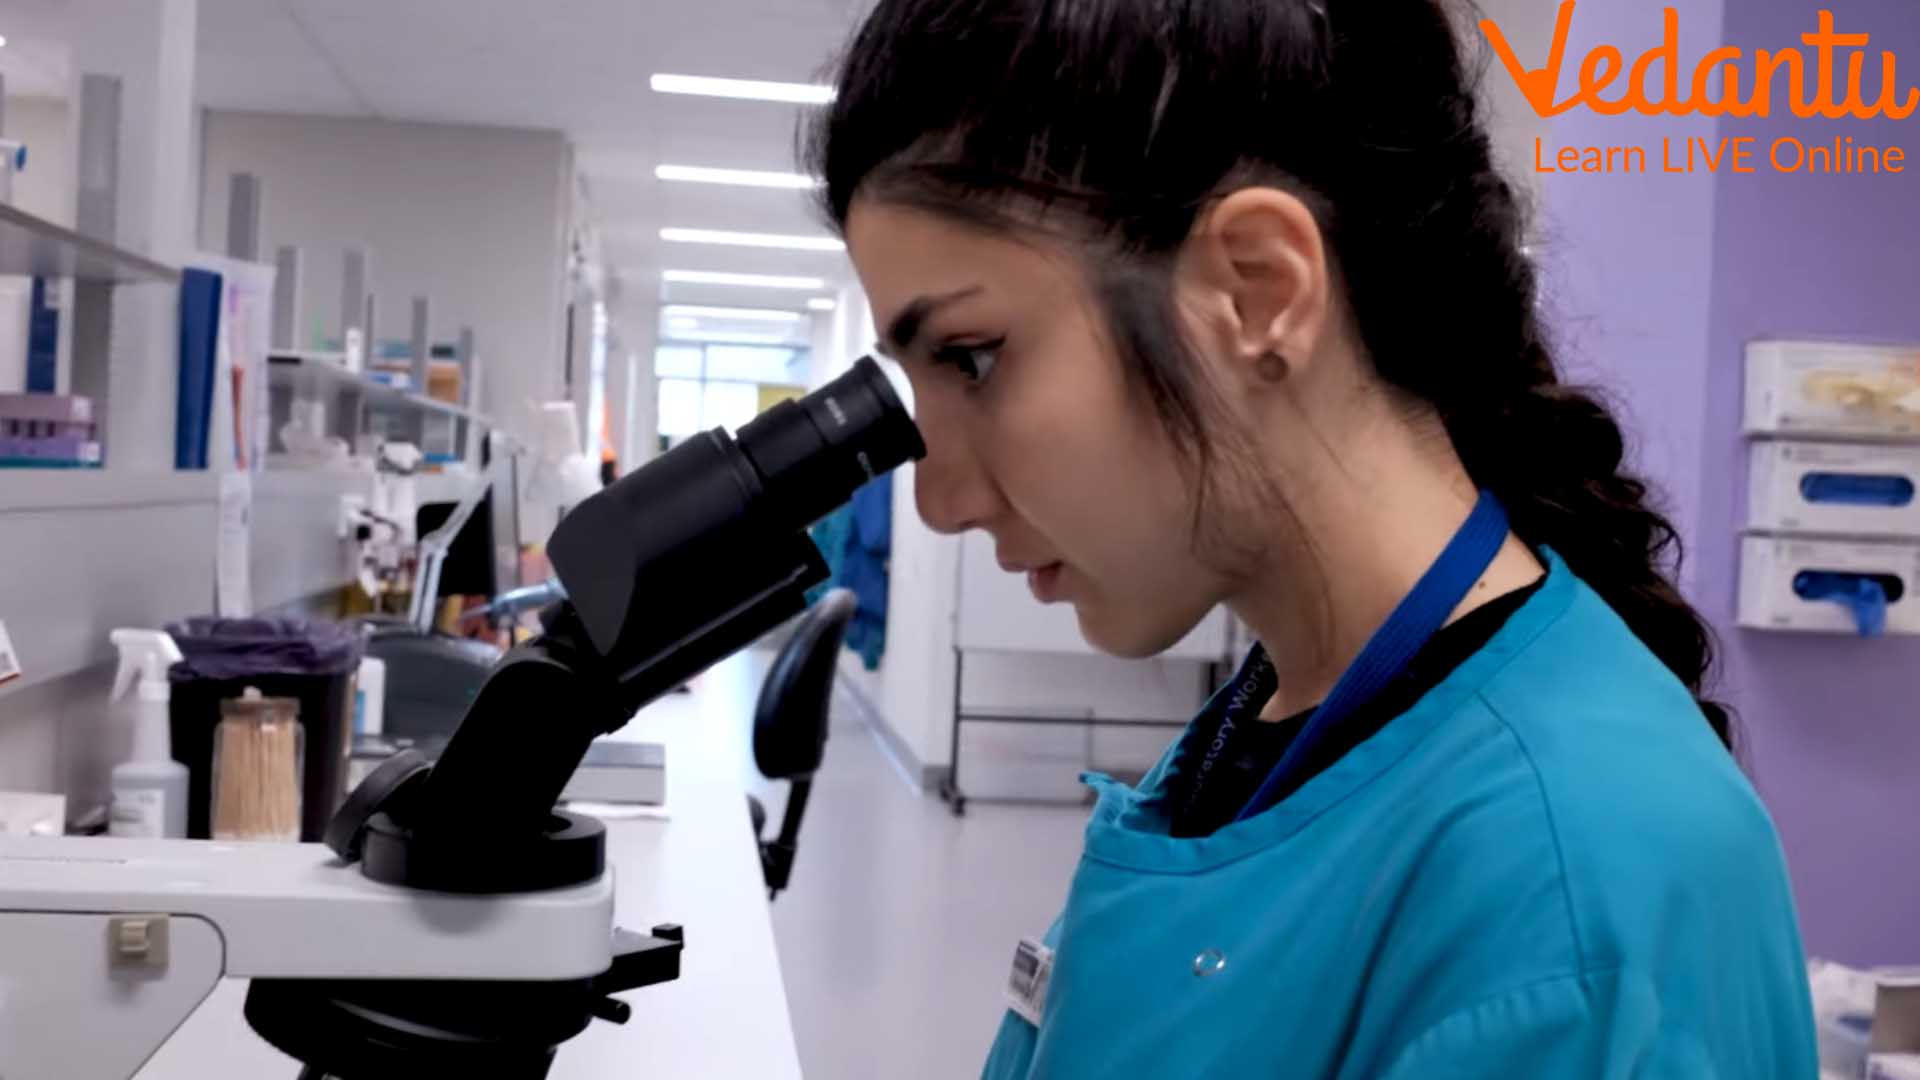 A Woman Looking into a Microscope